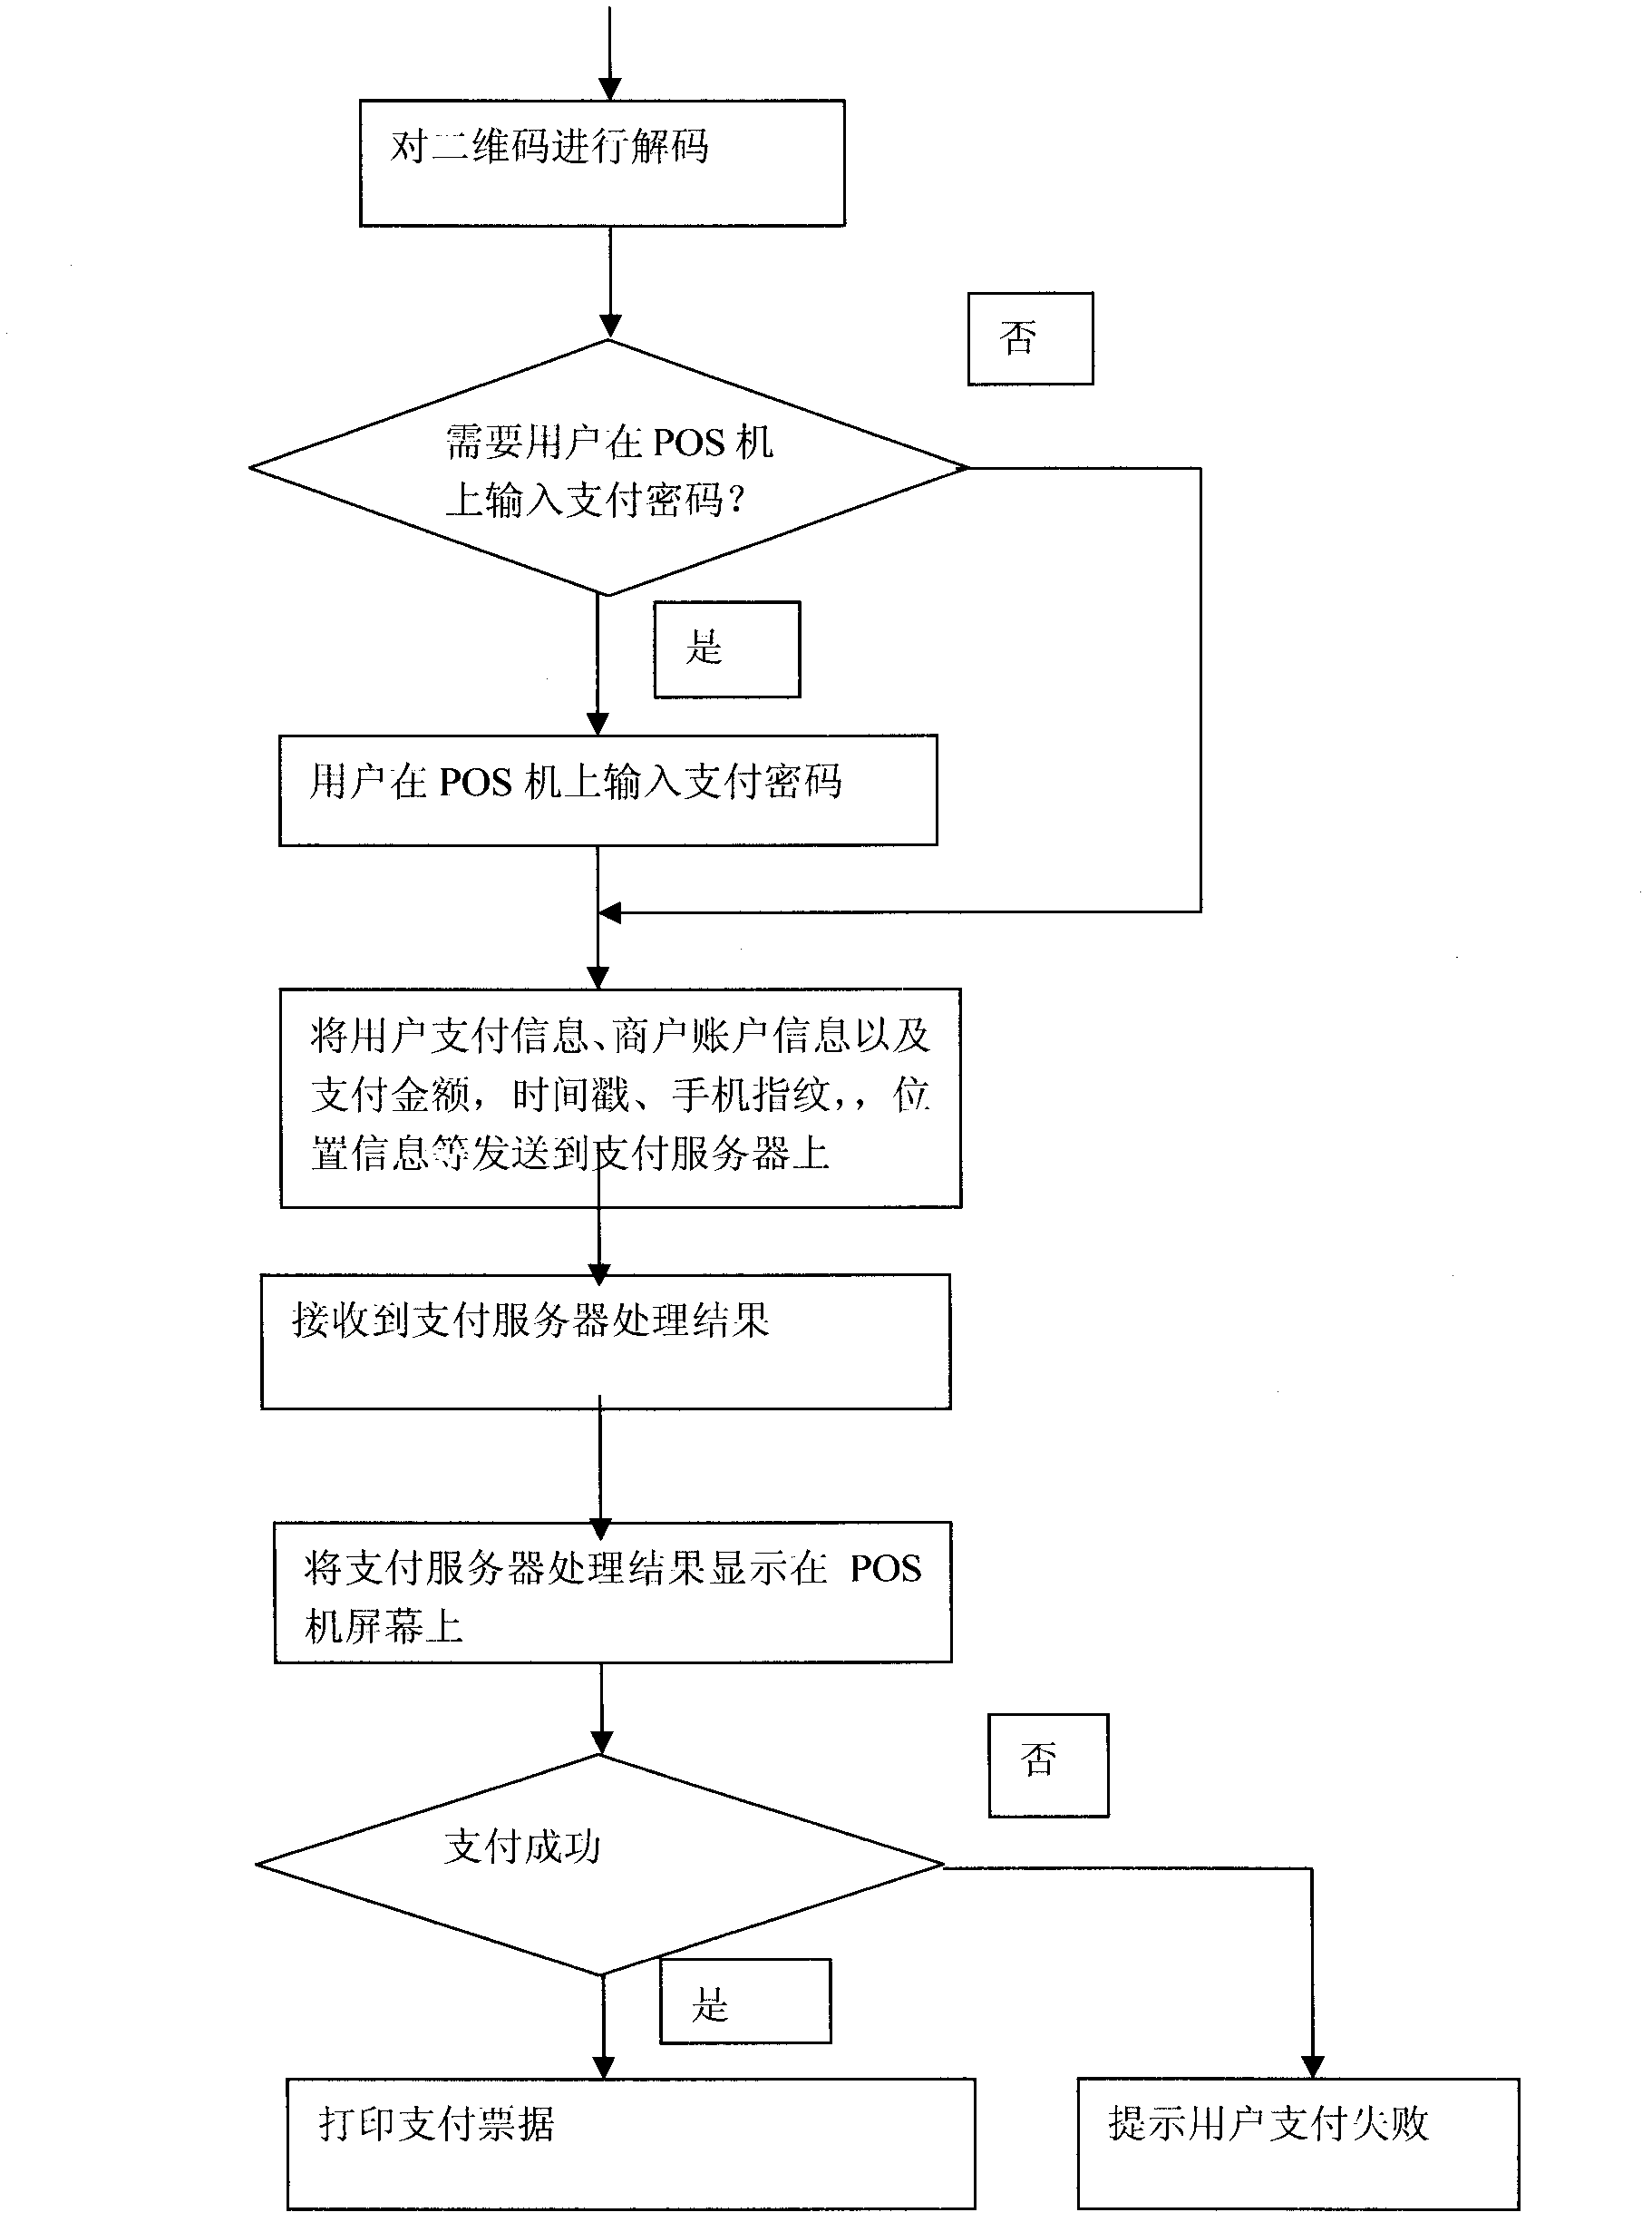 Method for generating two-dimensional code and implementing mobile payment by mobile phone